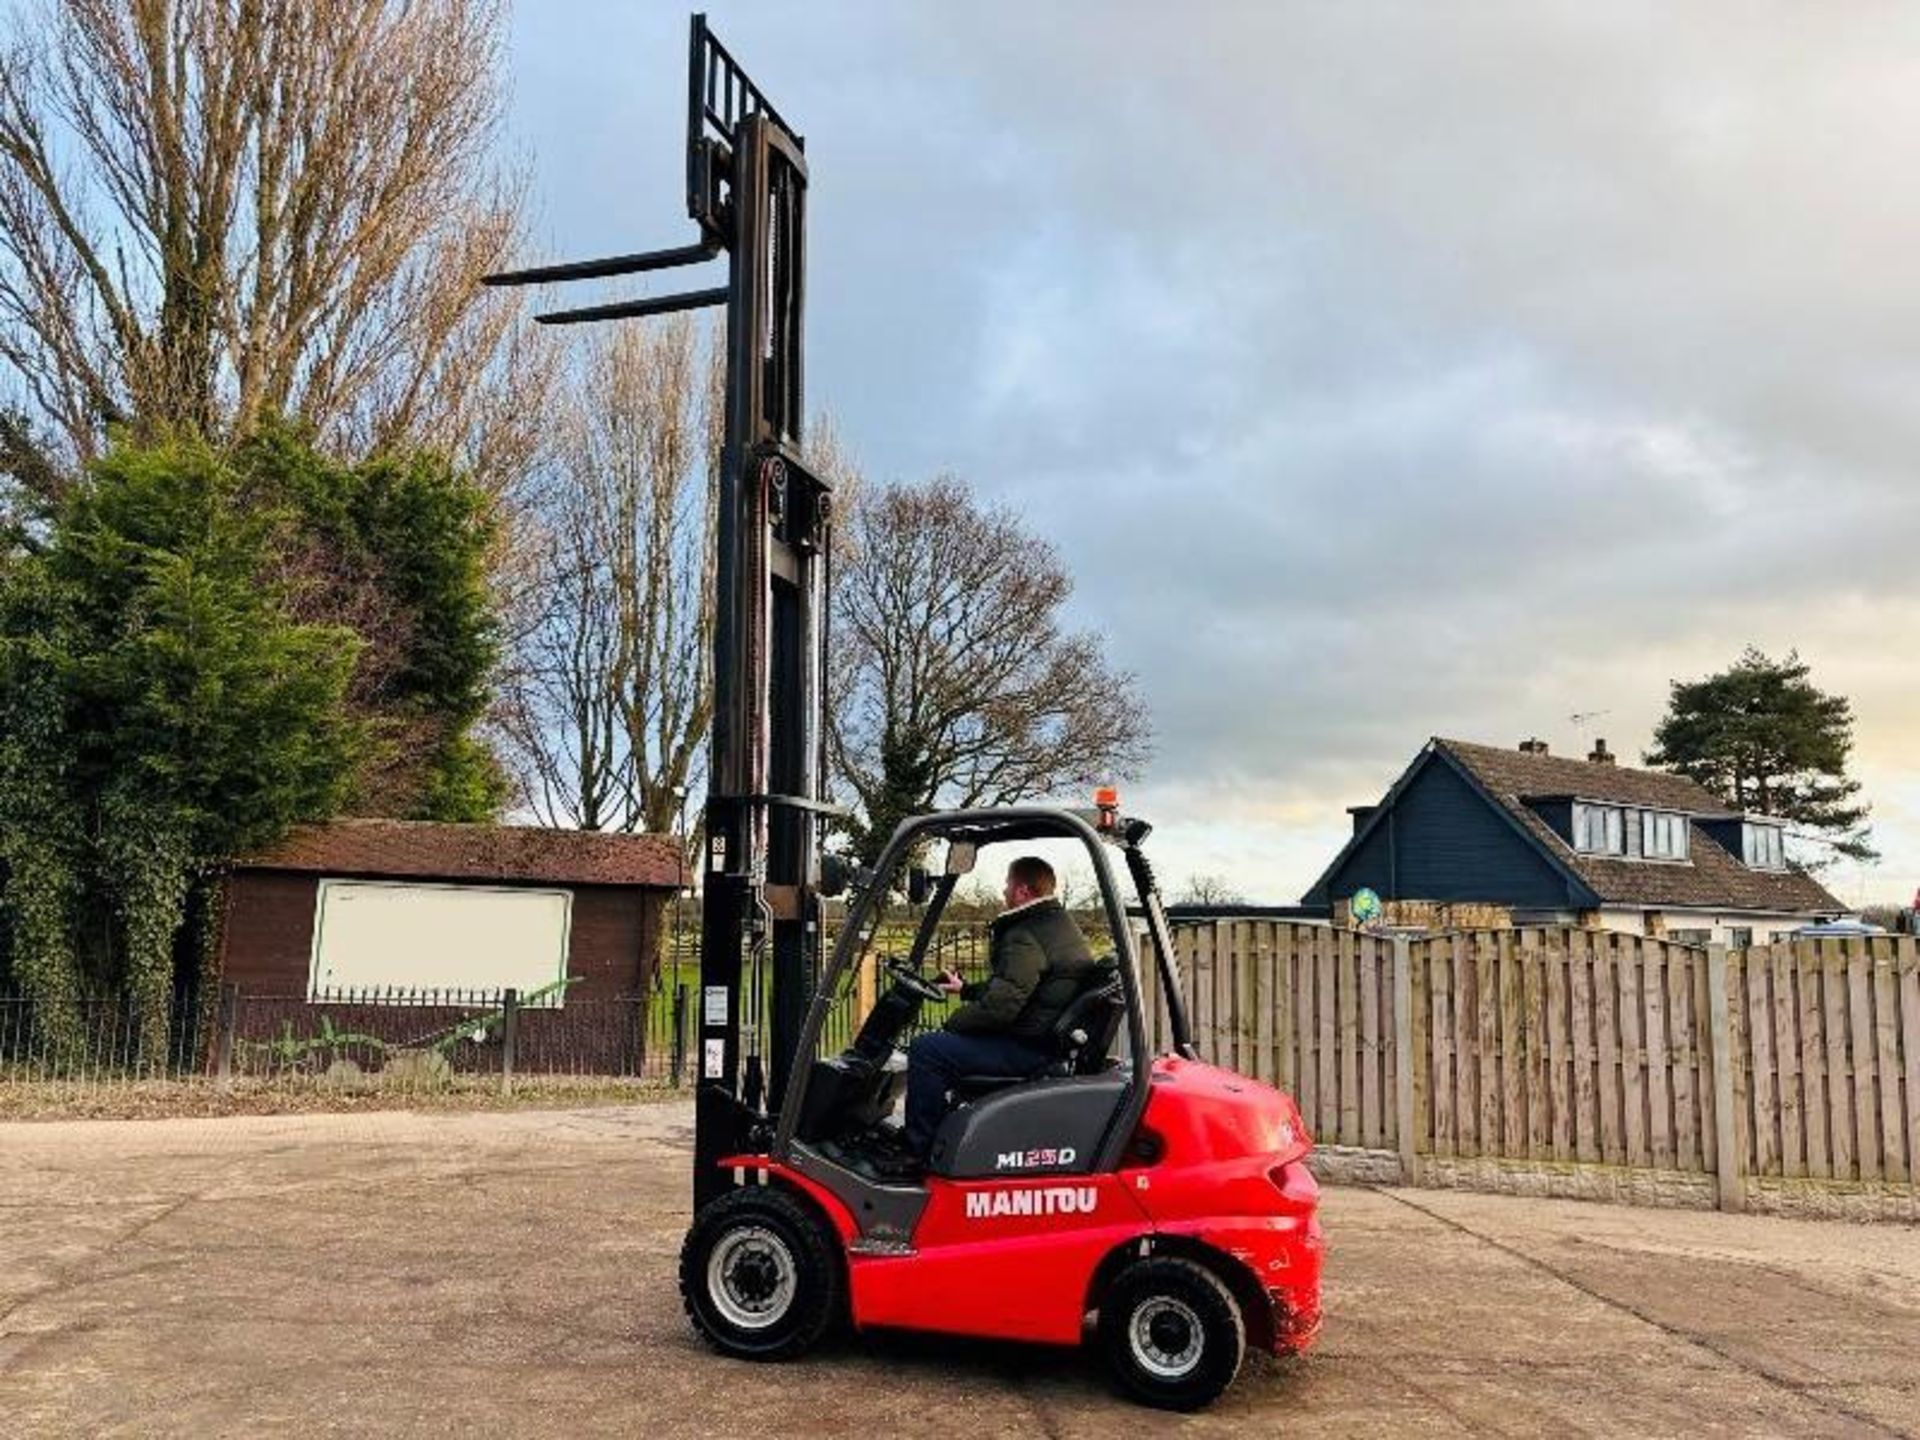 MANITOU MI25D CONTAINER SPEC FORKLIFT *YEAR 2018, 2660 HOURS* C/W SIDE SHIFT - Image 2 of 17